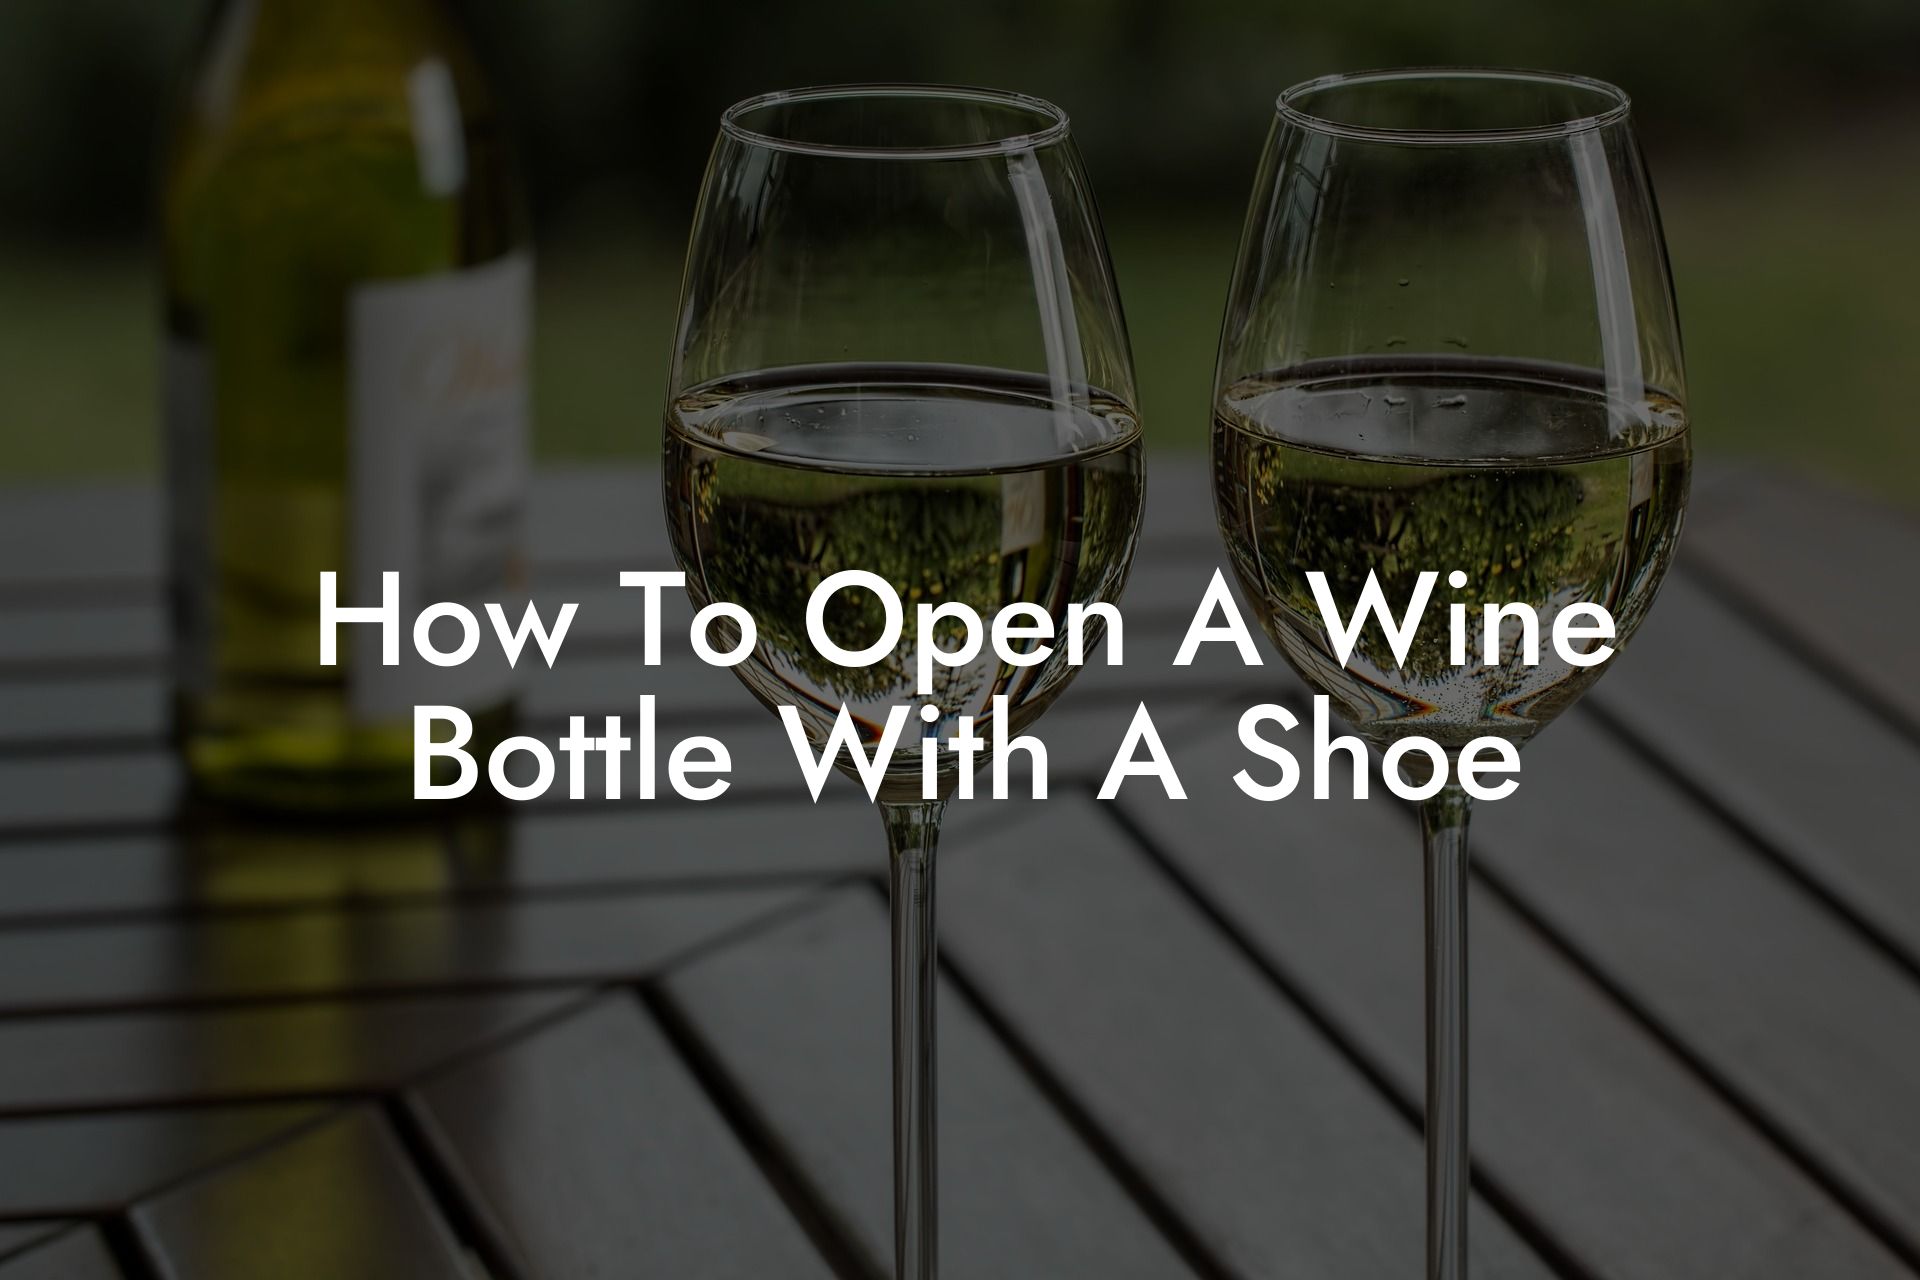 How To Open A Wine Bottle With A Shoe